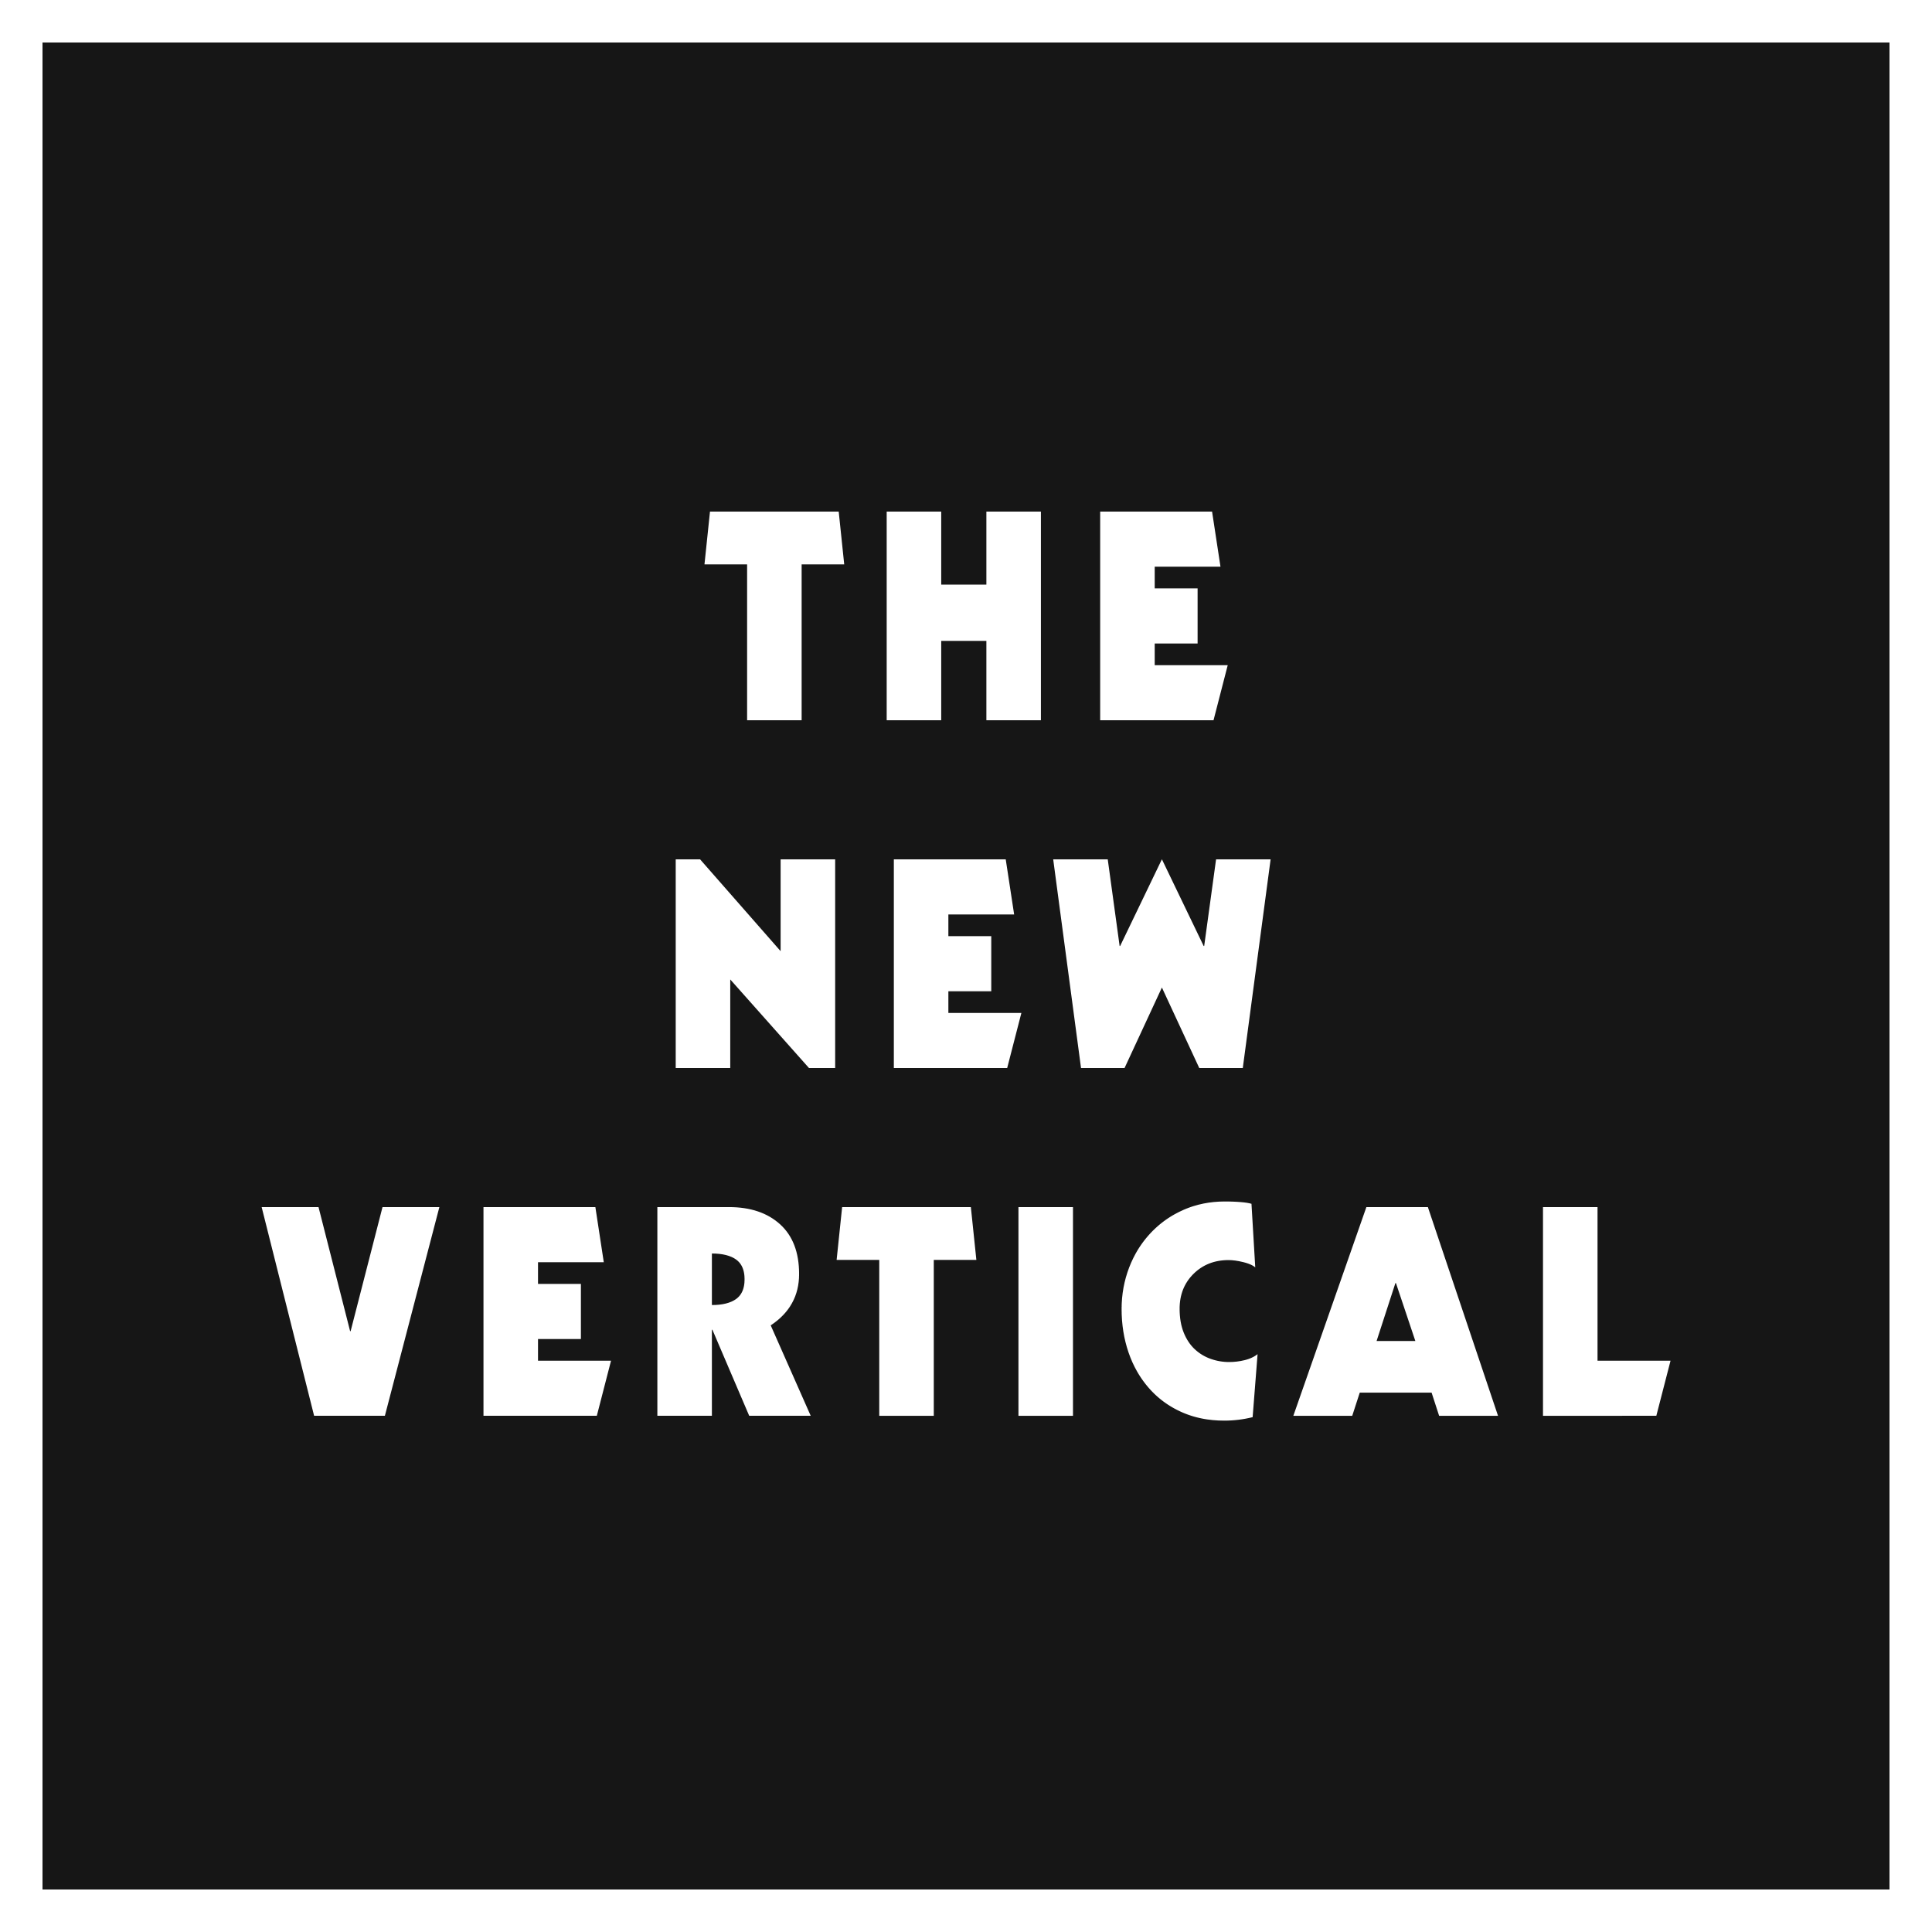 The New Vertical